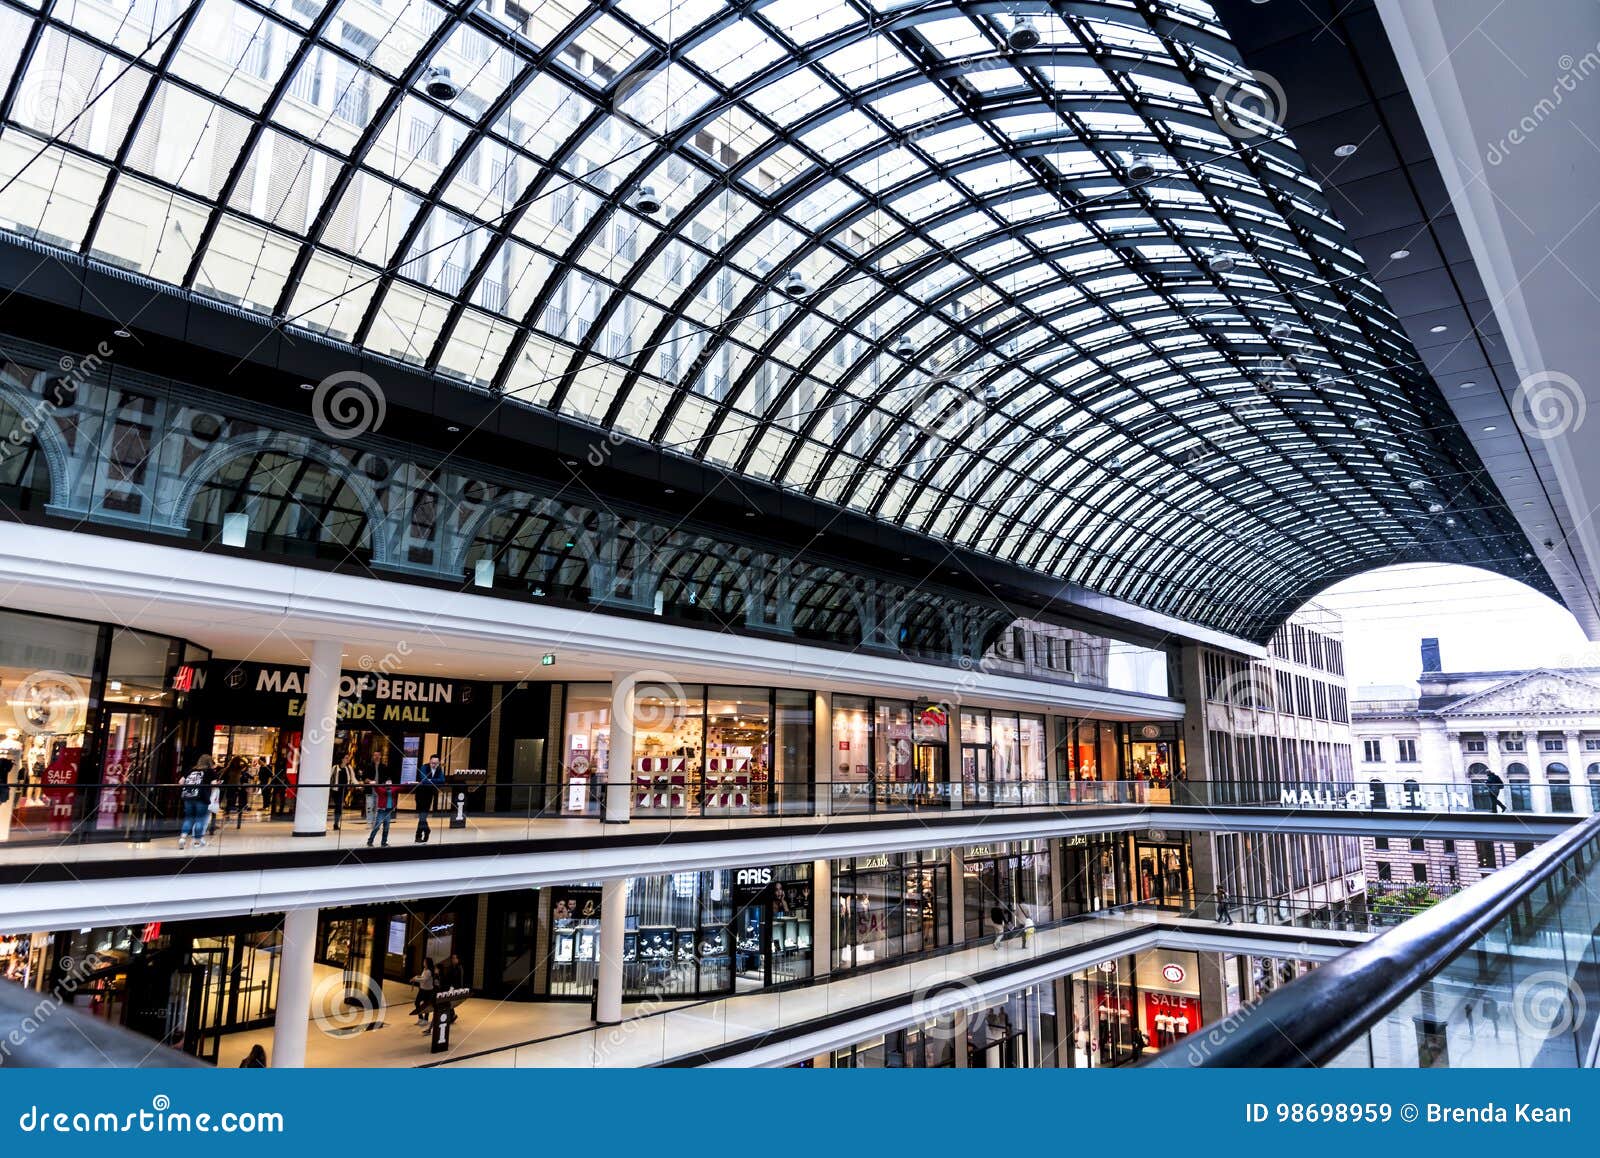 View of new Mall of Berlin shopping mall in Potsdamer Platz